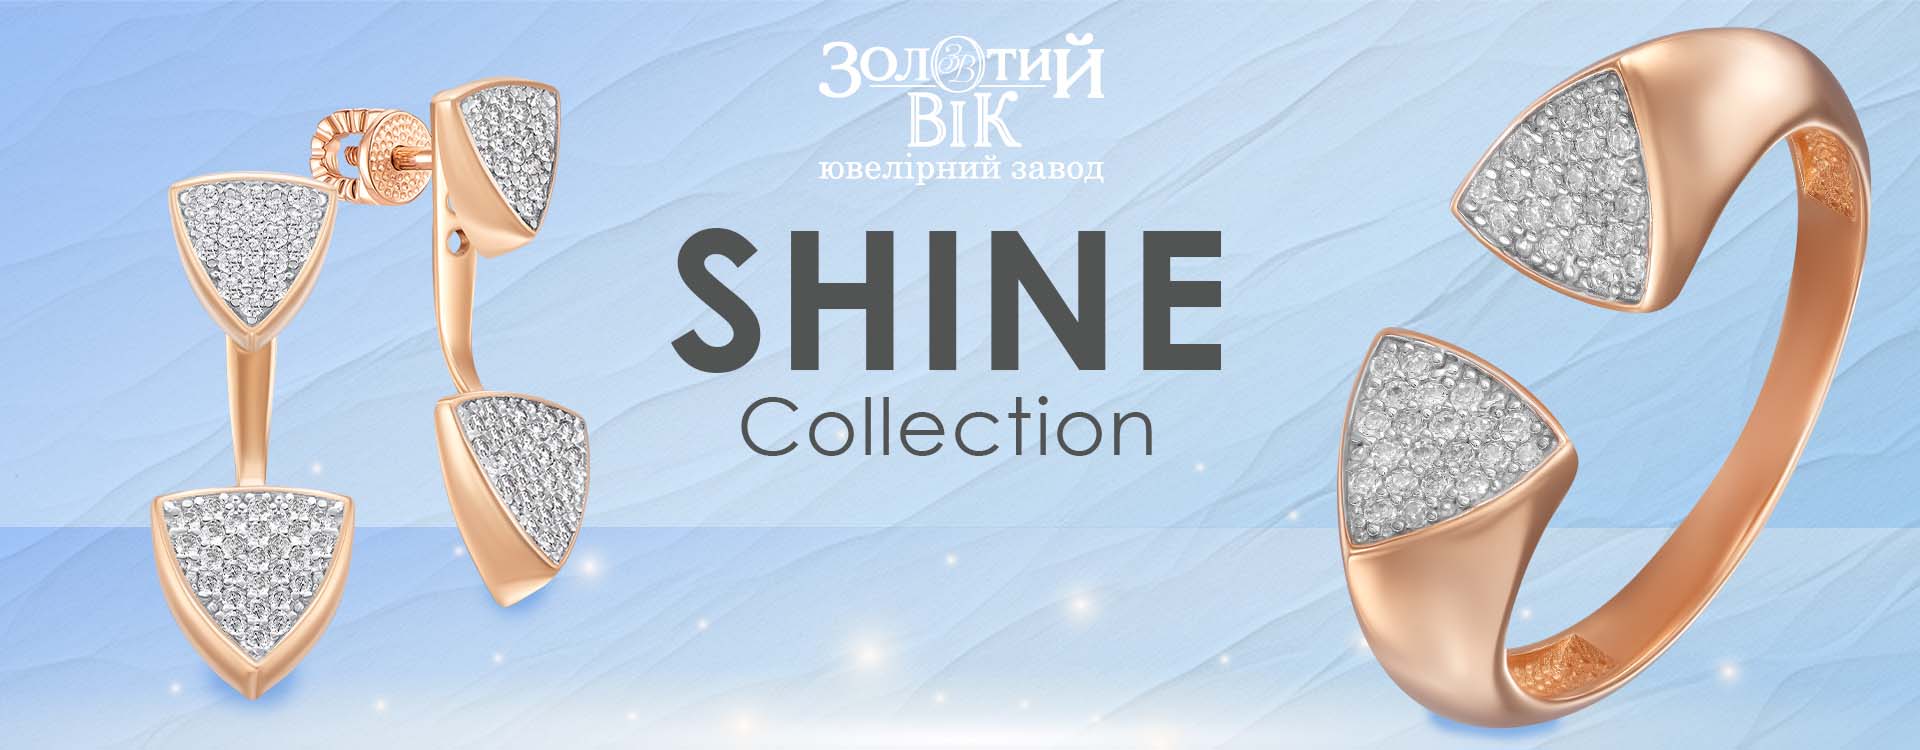 Meet the new "Shine" collection